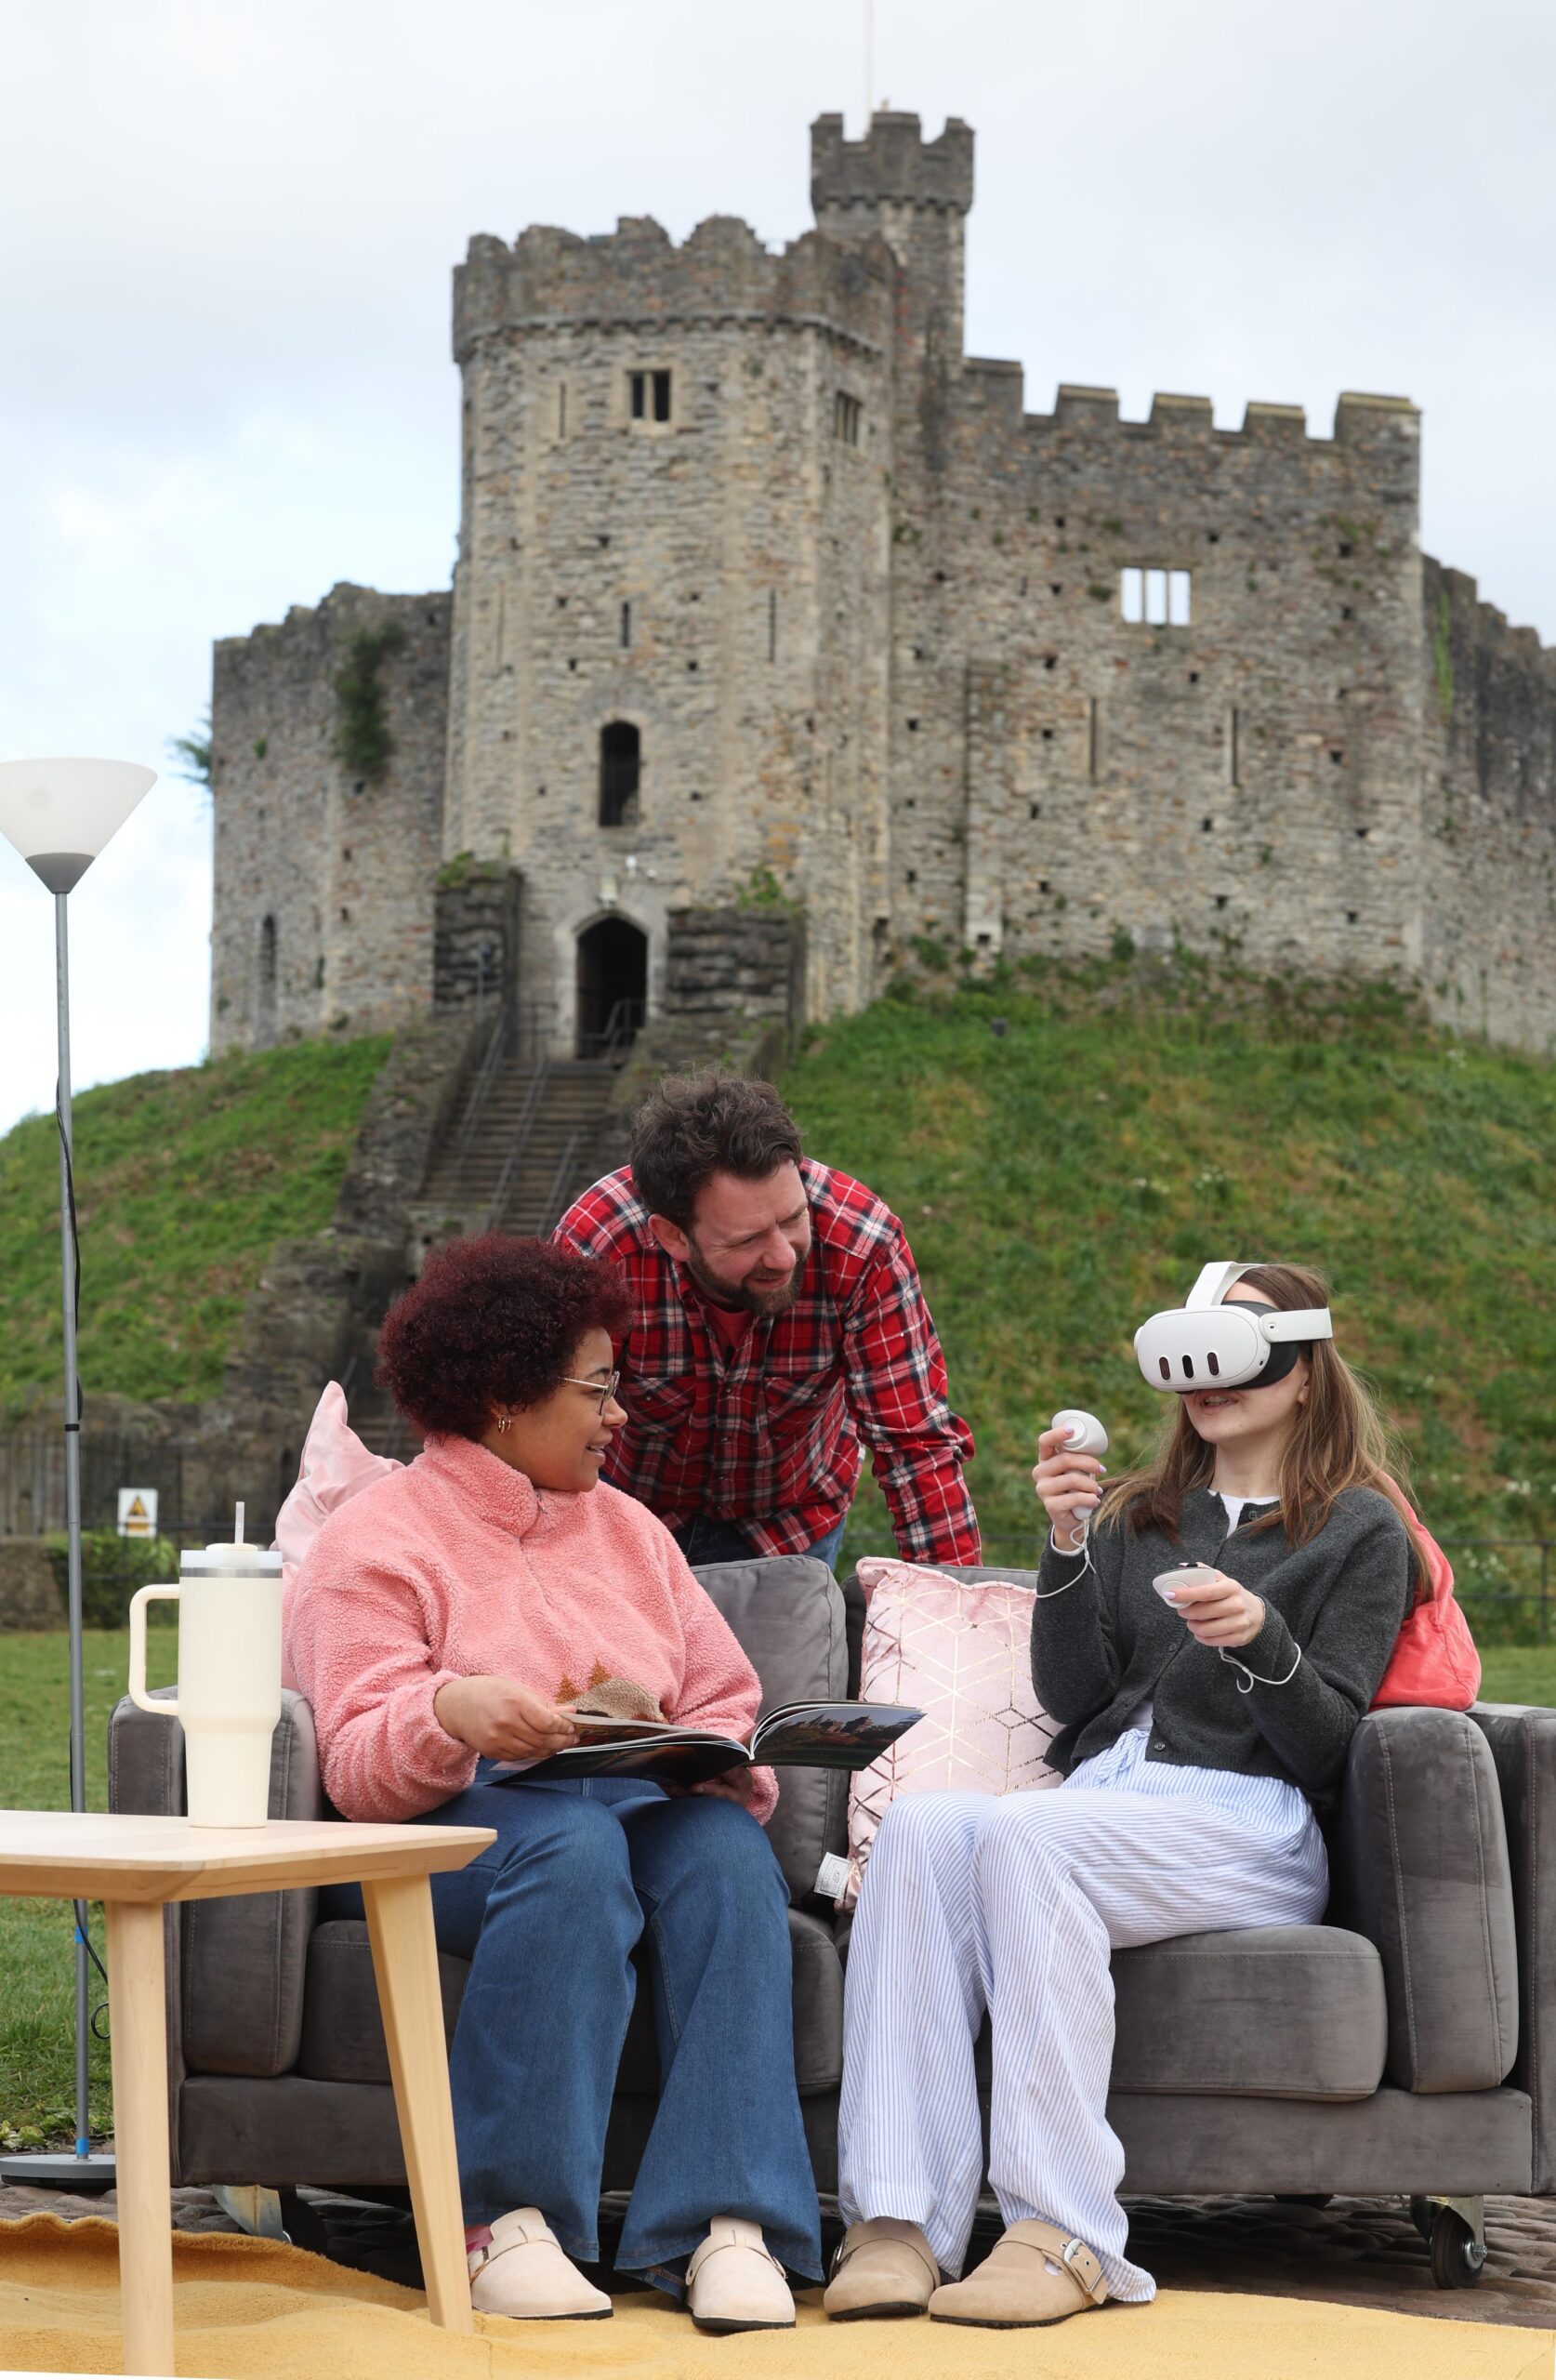 In front of a Welsh castle, two adults sit supervising a child in a VR headset